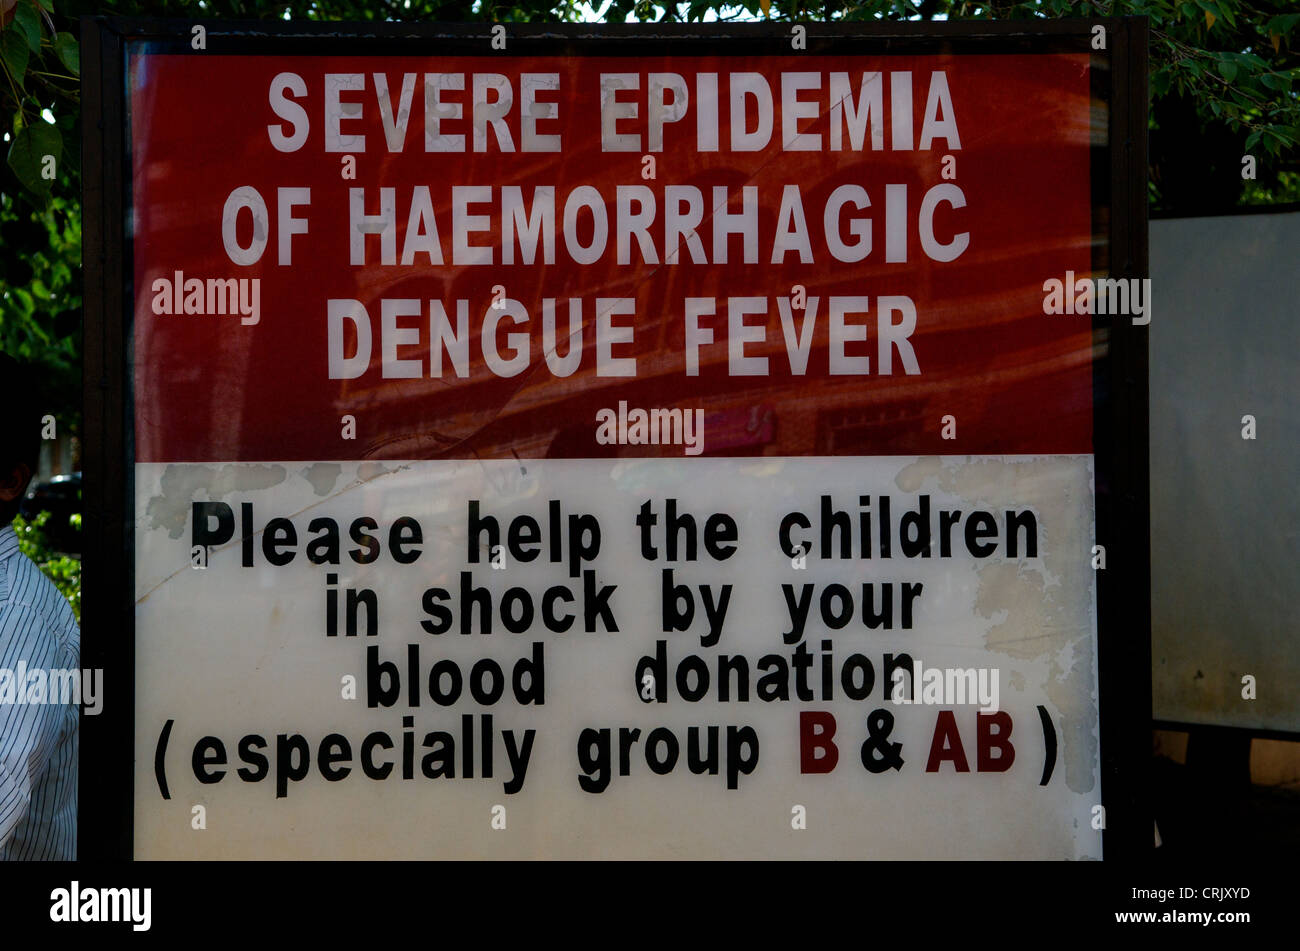 'Dengue Fever' sign at Kantha Bopha Children's Hospital asking for blood donations due to severe epidemic, Siem Reap, Cambodia. © Kraig Lieb Stock Photo